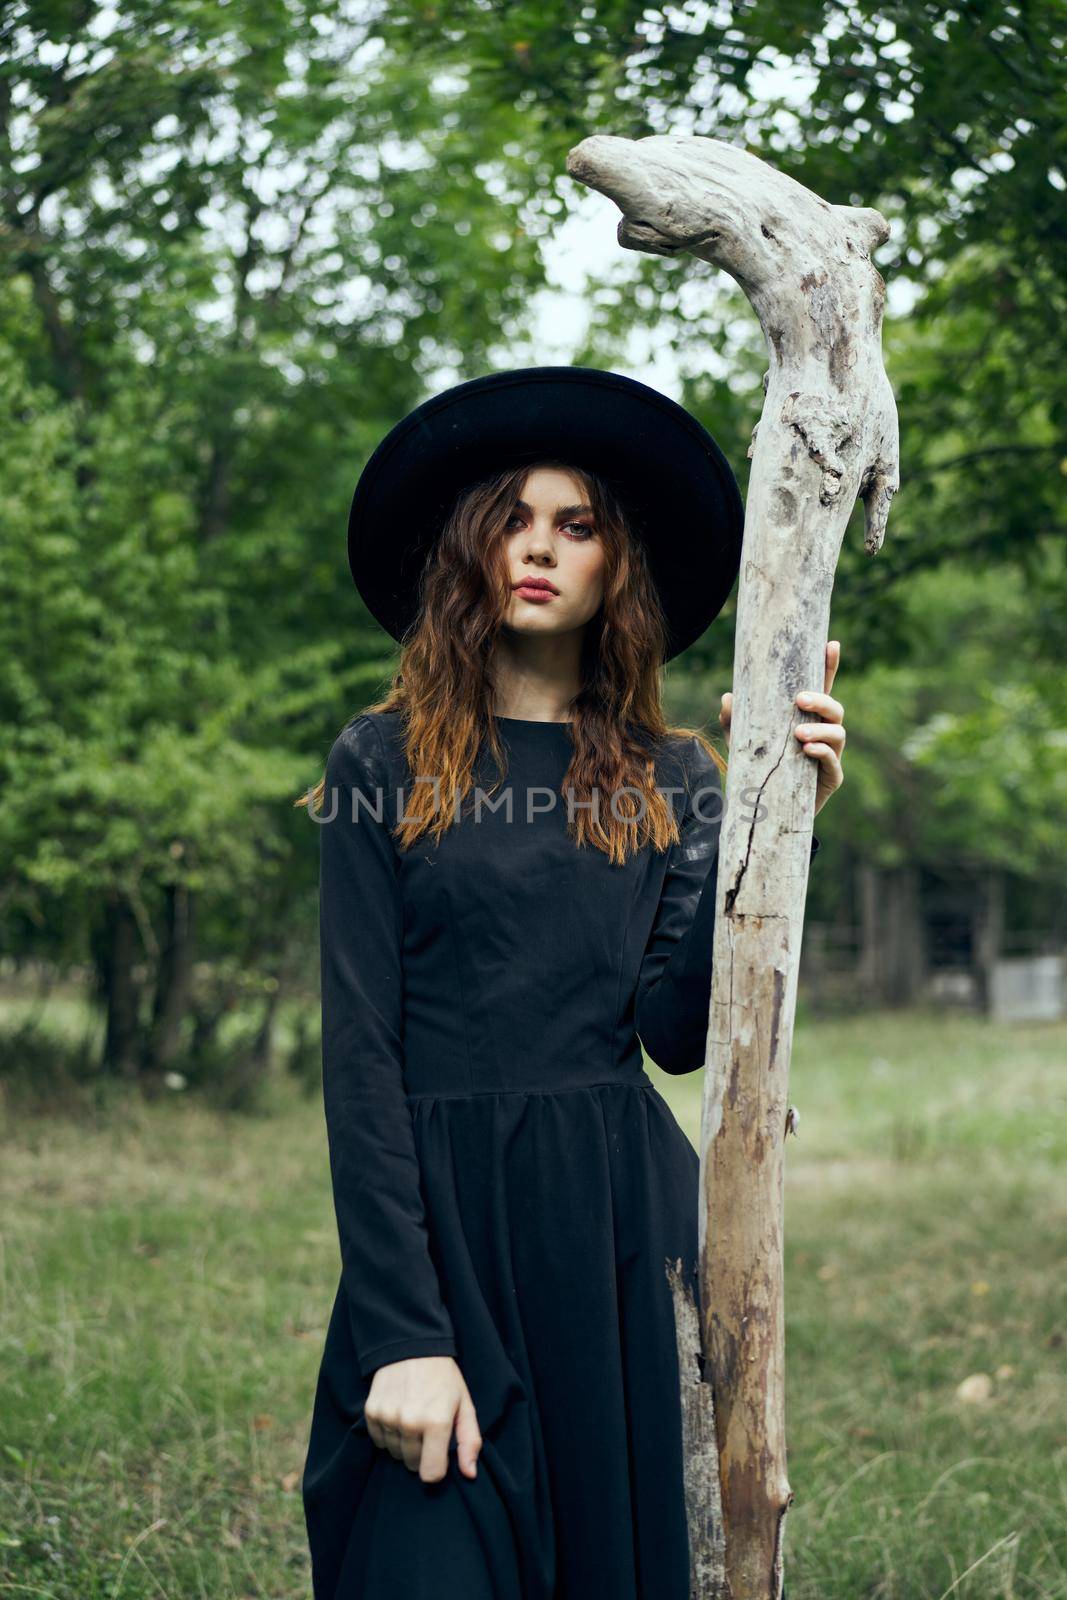 woman in witch costume fantasy magic forest posing. High quality photo